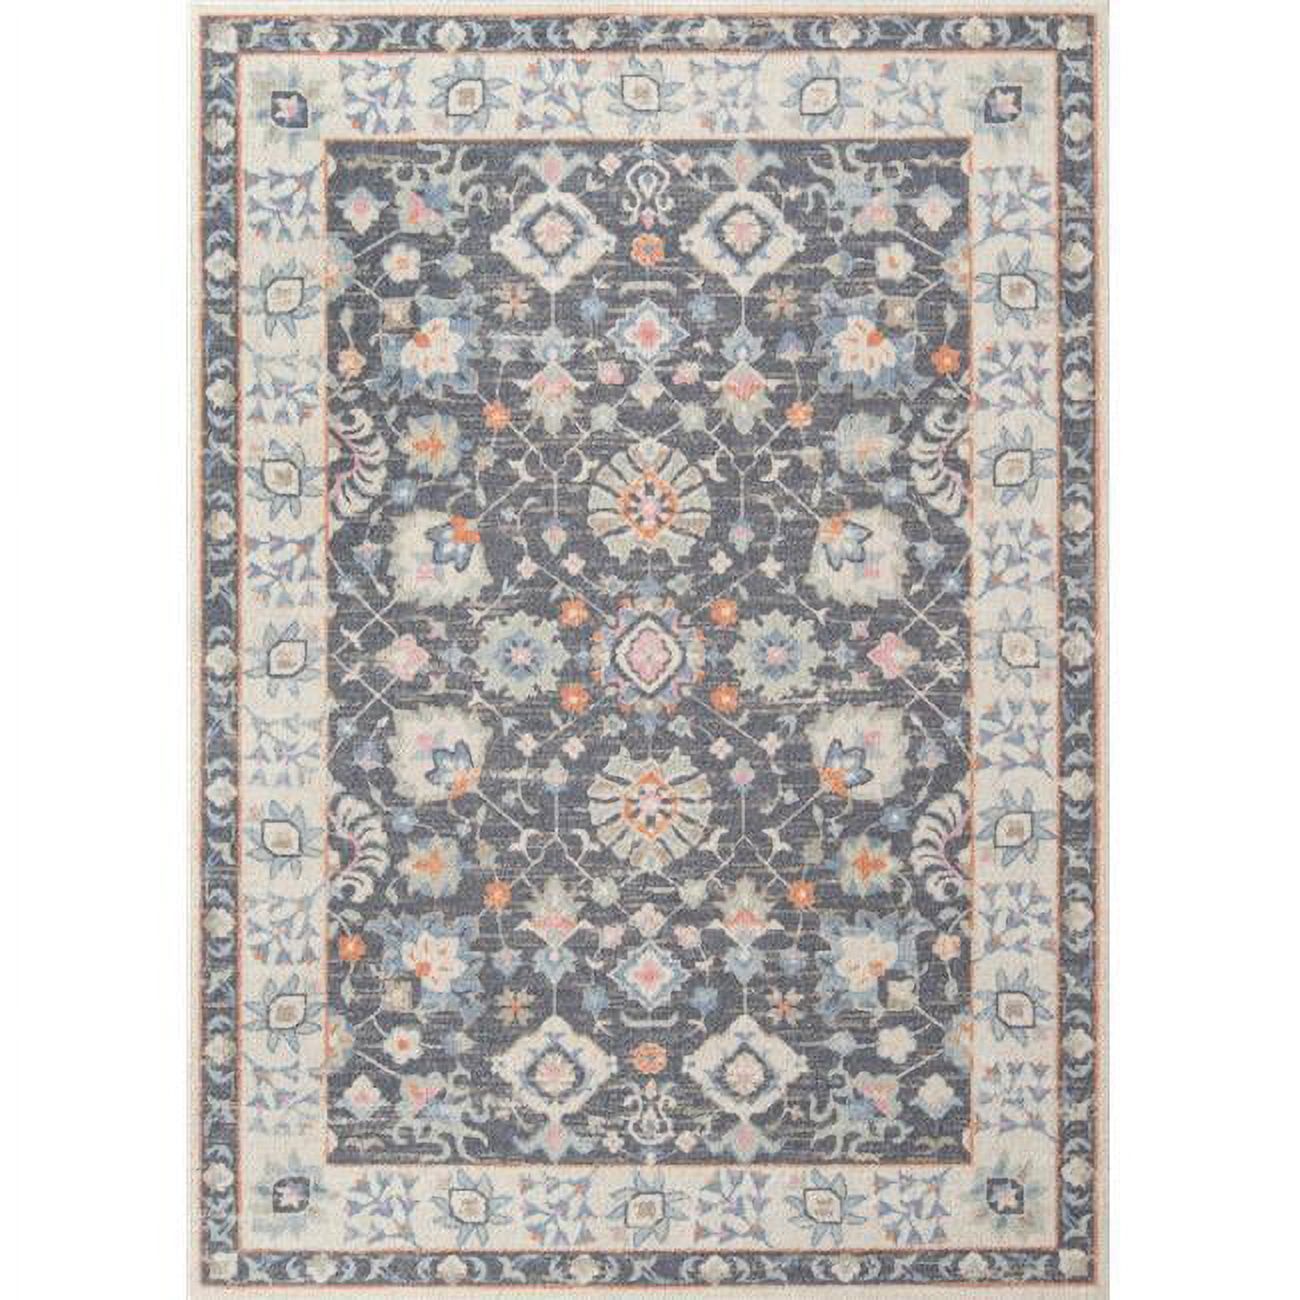 Charcoal Medallion Tufted Wool-Synthetic Blend Area Rug, 3'3" x 5'